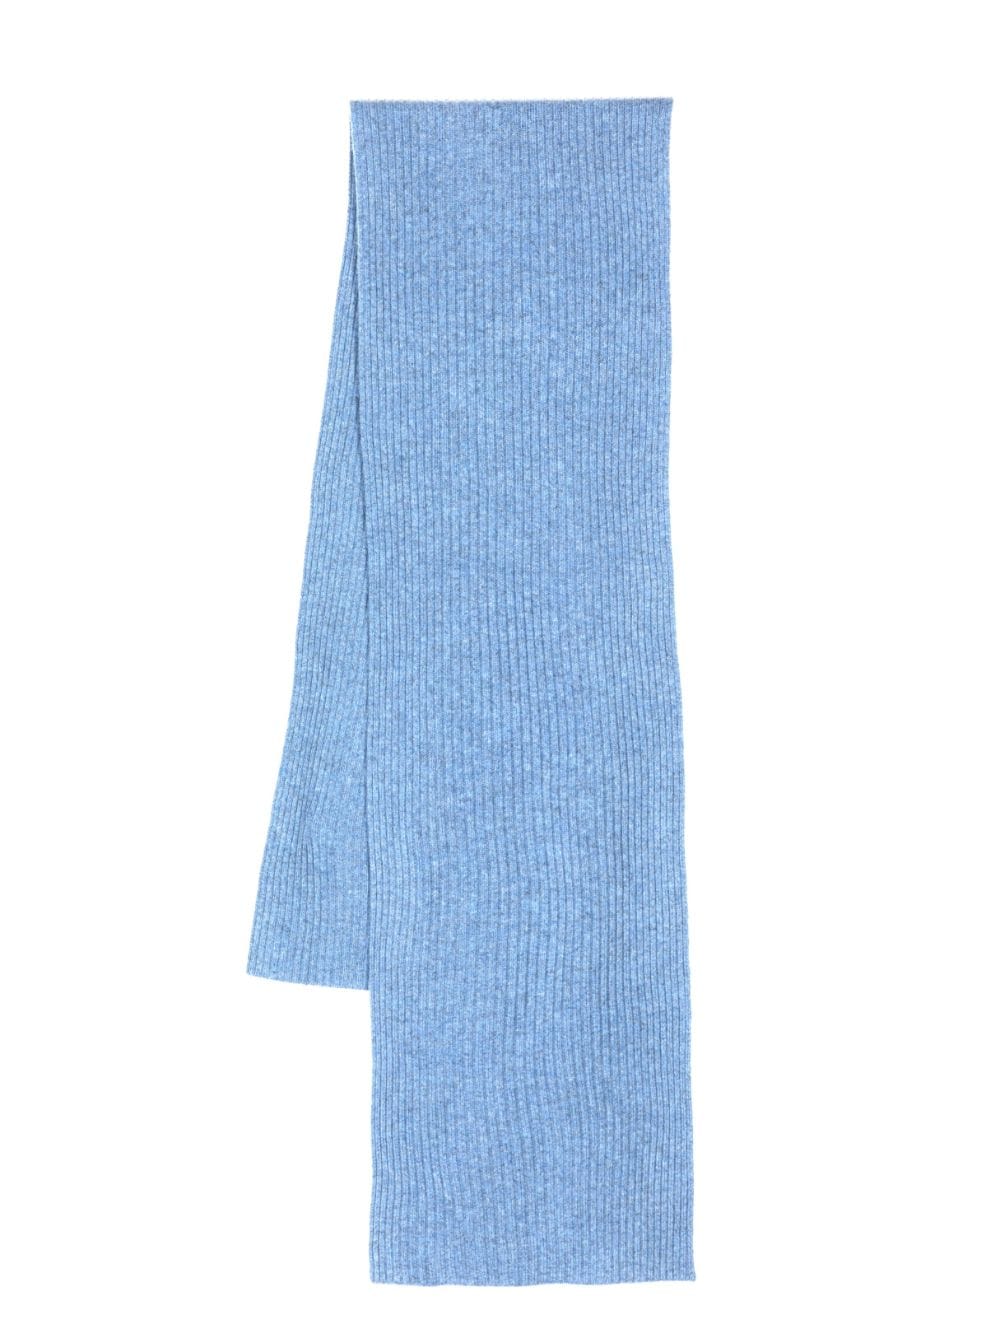 N.Peal ribbed-knit cashmere scarf - Blue von N.Peal